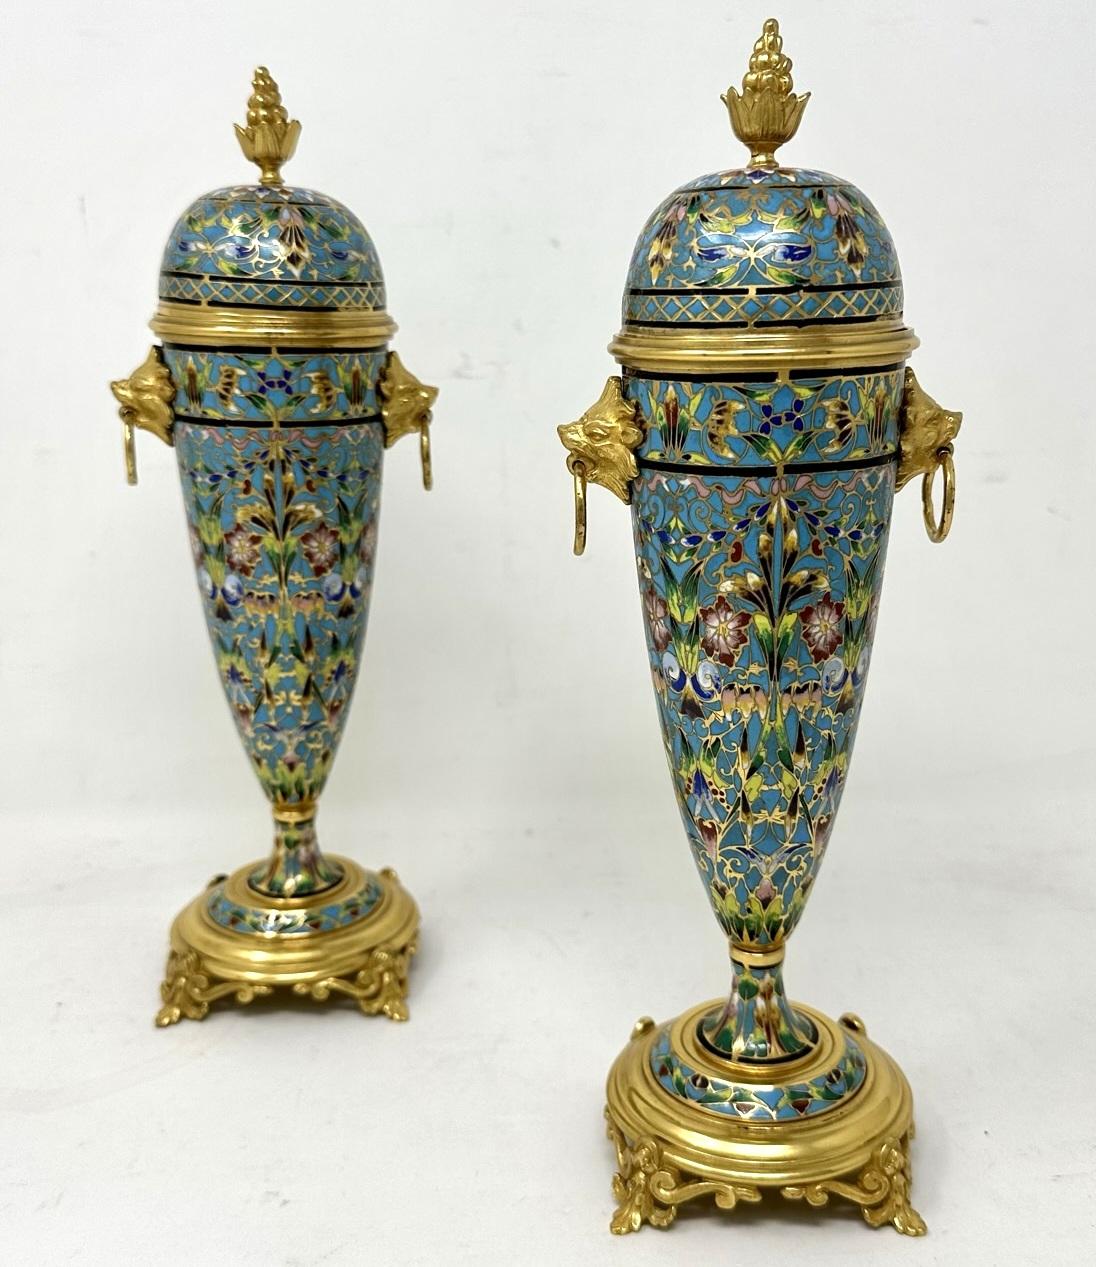 An Exceptionally Stylish Pair of French Bronze Dore and Champleve Cloisonne dome lidded Vases of outstanding quality. Third quarter of the Nineteenth Century. 

This magnificent pair of Vases are wrought from Gilt Ormolu and Champleve enamel in the